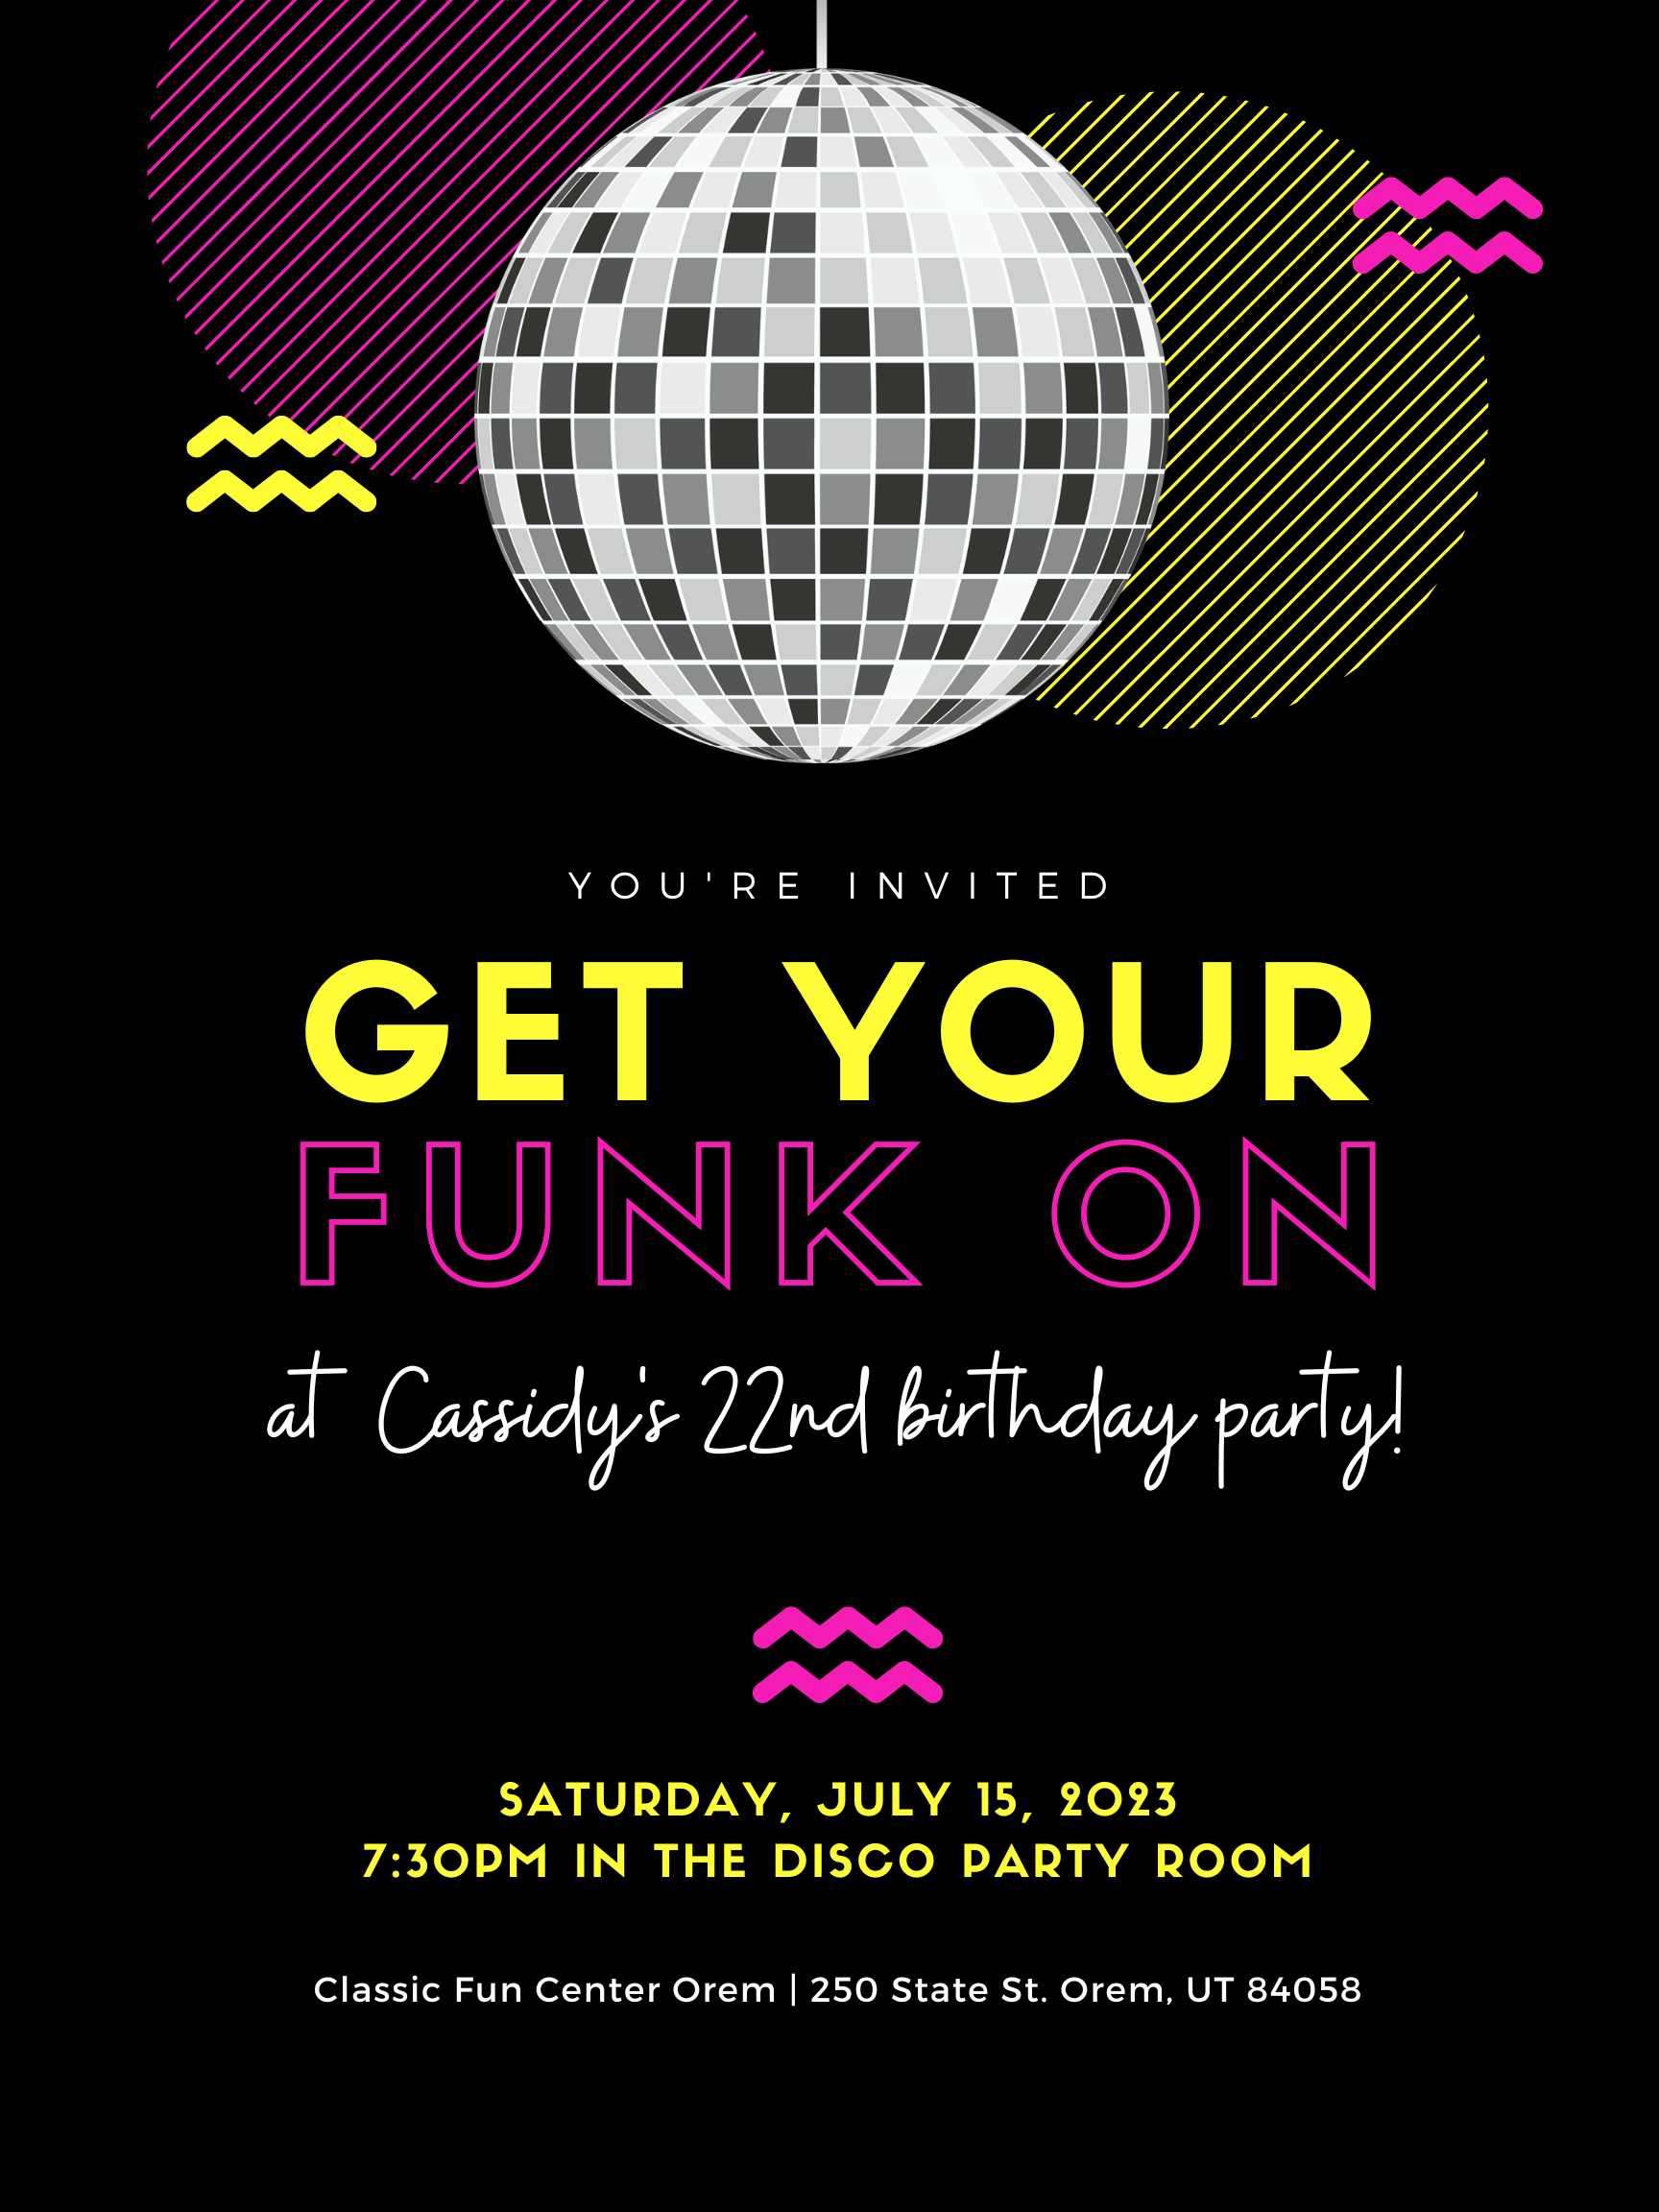 Neon Pink Yellow Random Shapes Disco Ball Funky Block Party Poster.png